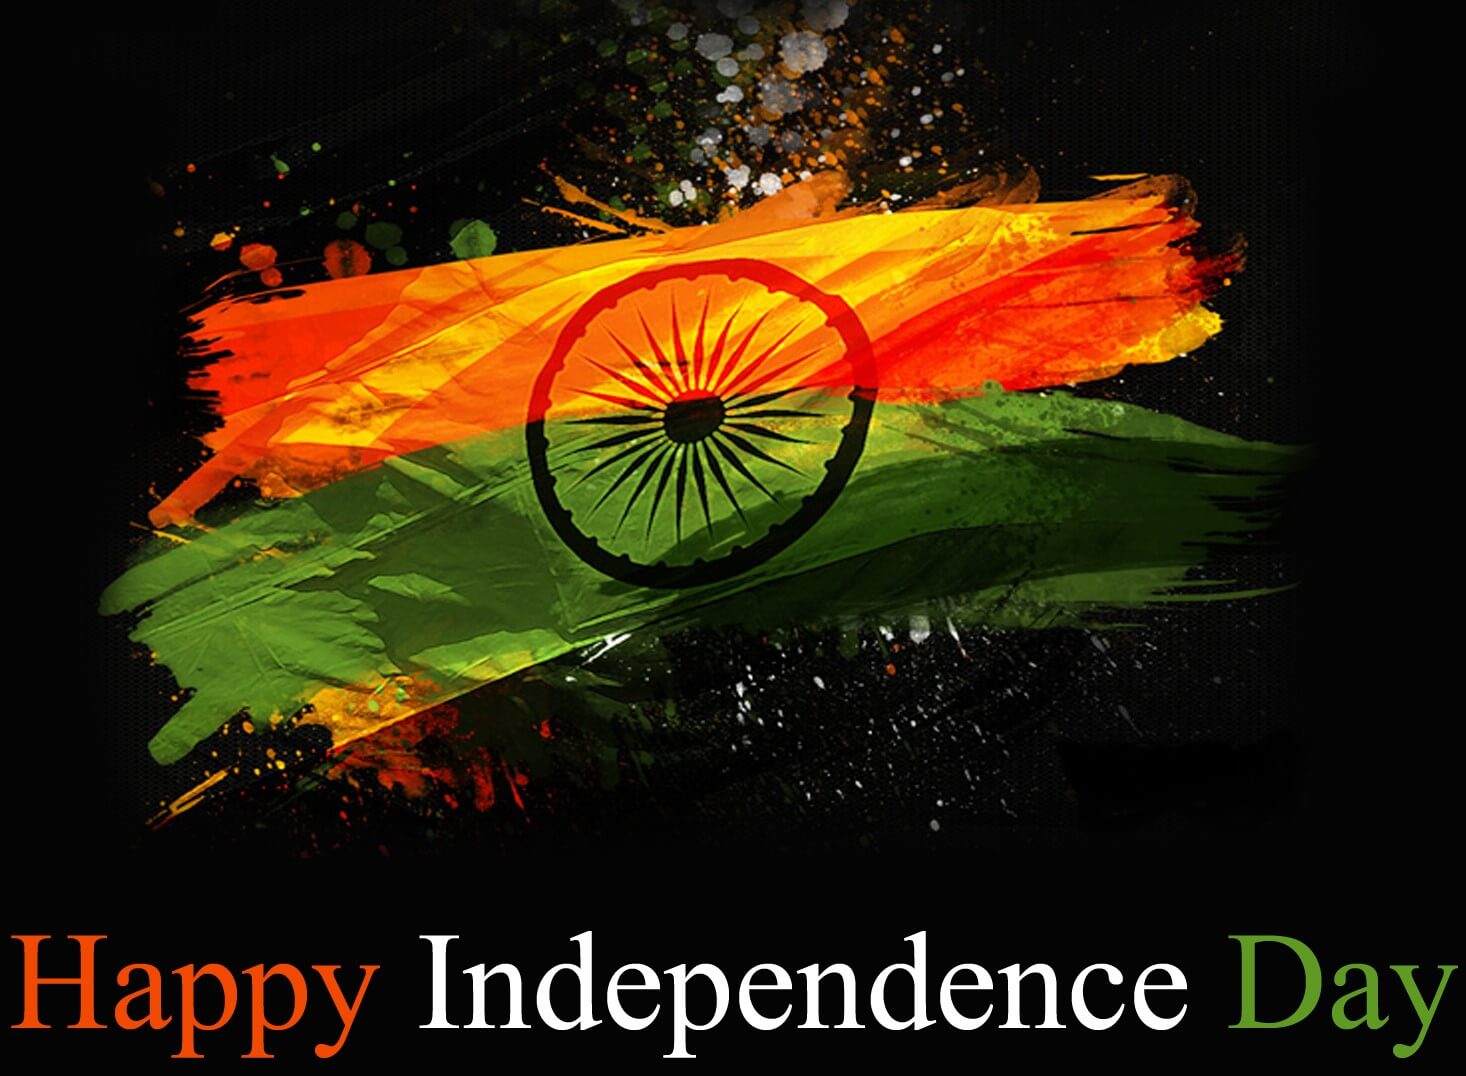 Essay independence day 15th august